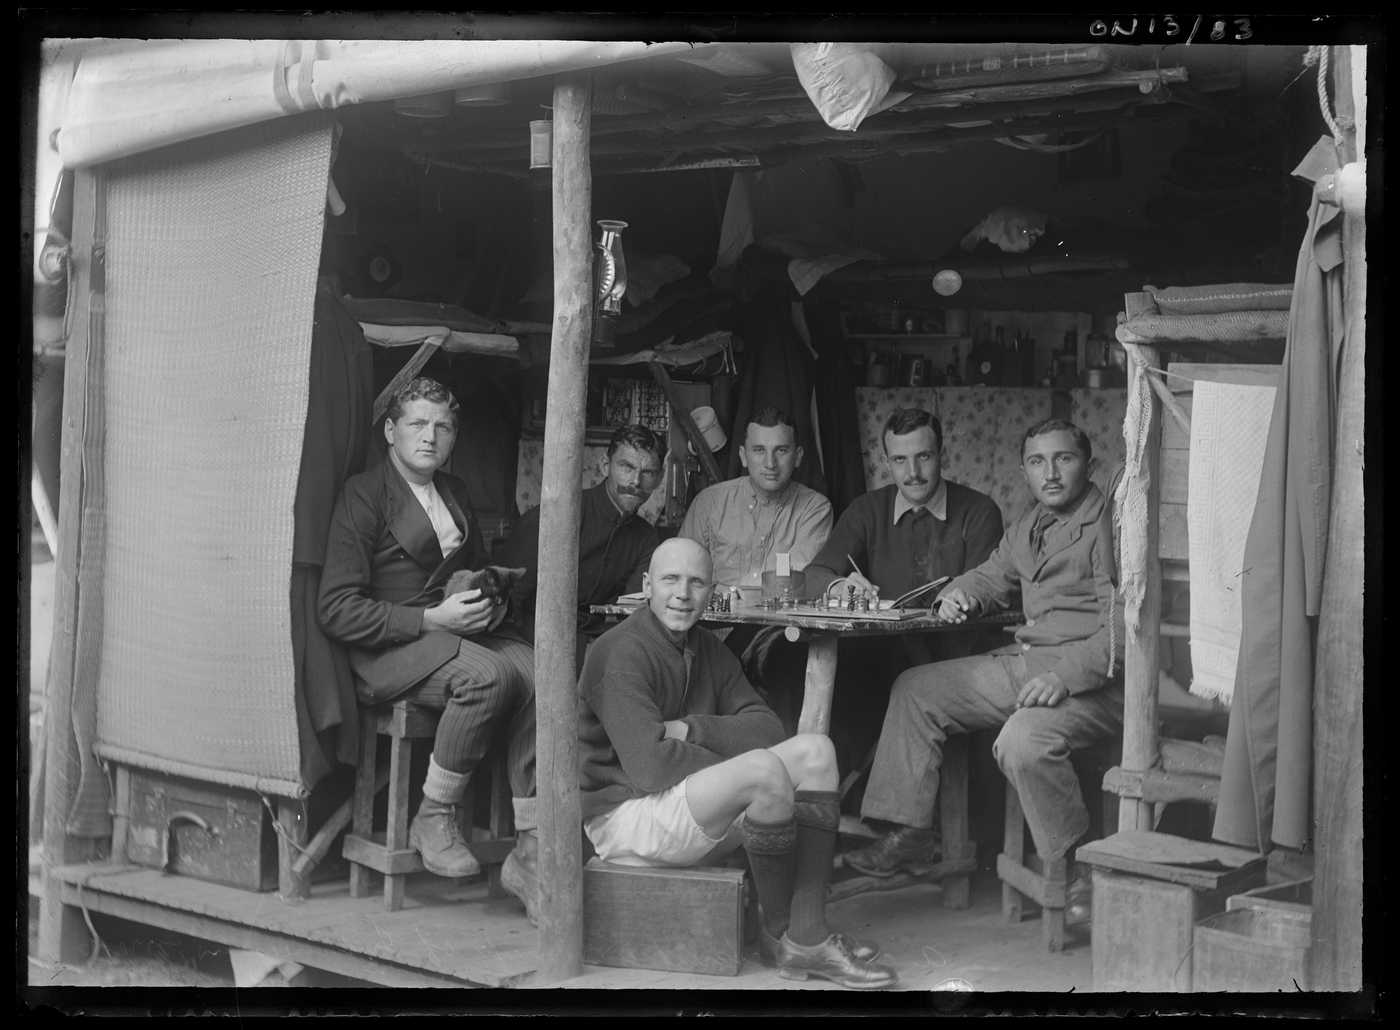 Black and white photograph of men sitting around a table playing chess, in a make shift shelter.